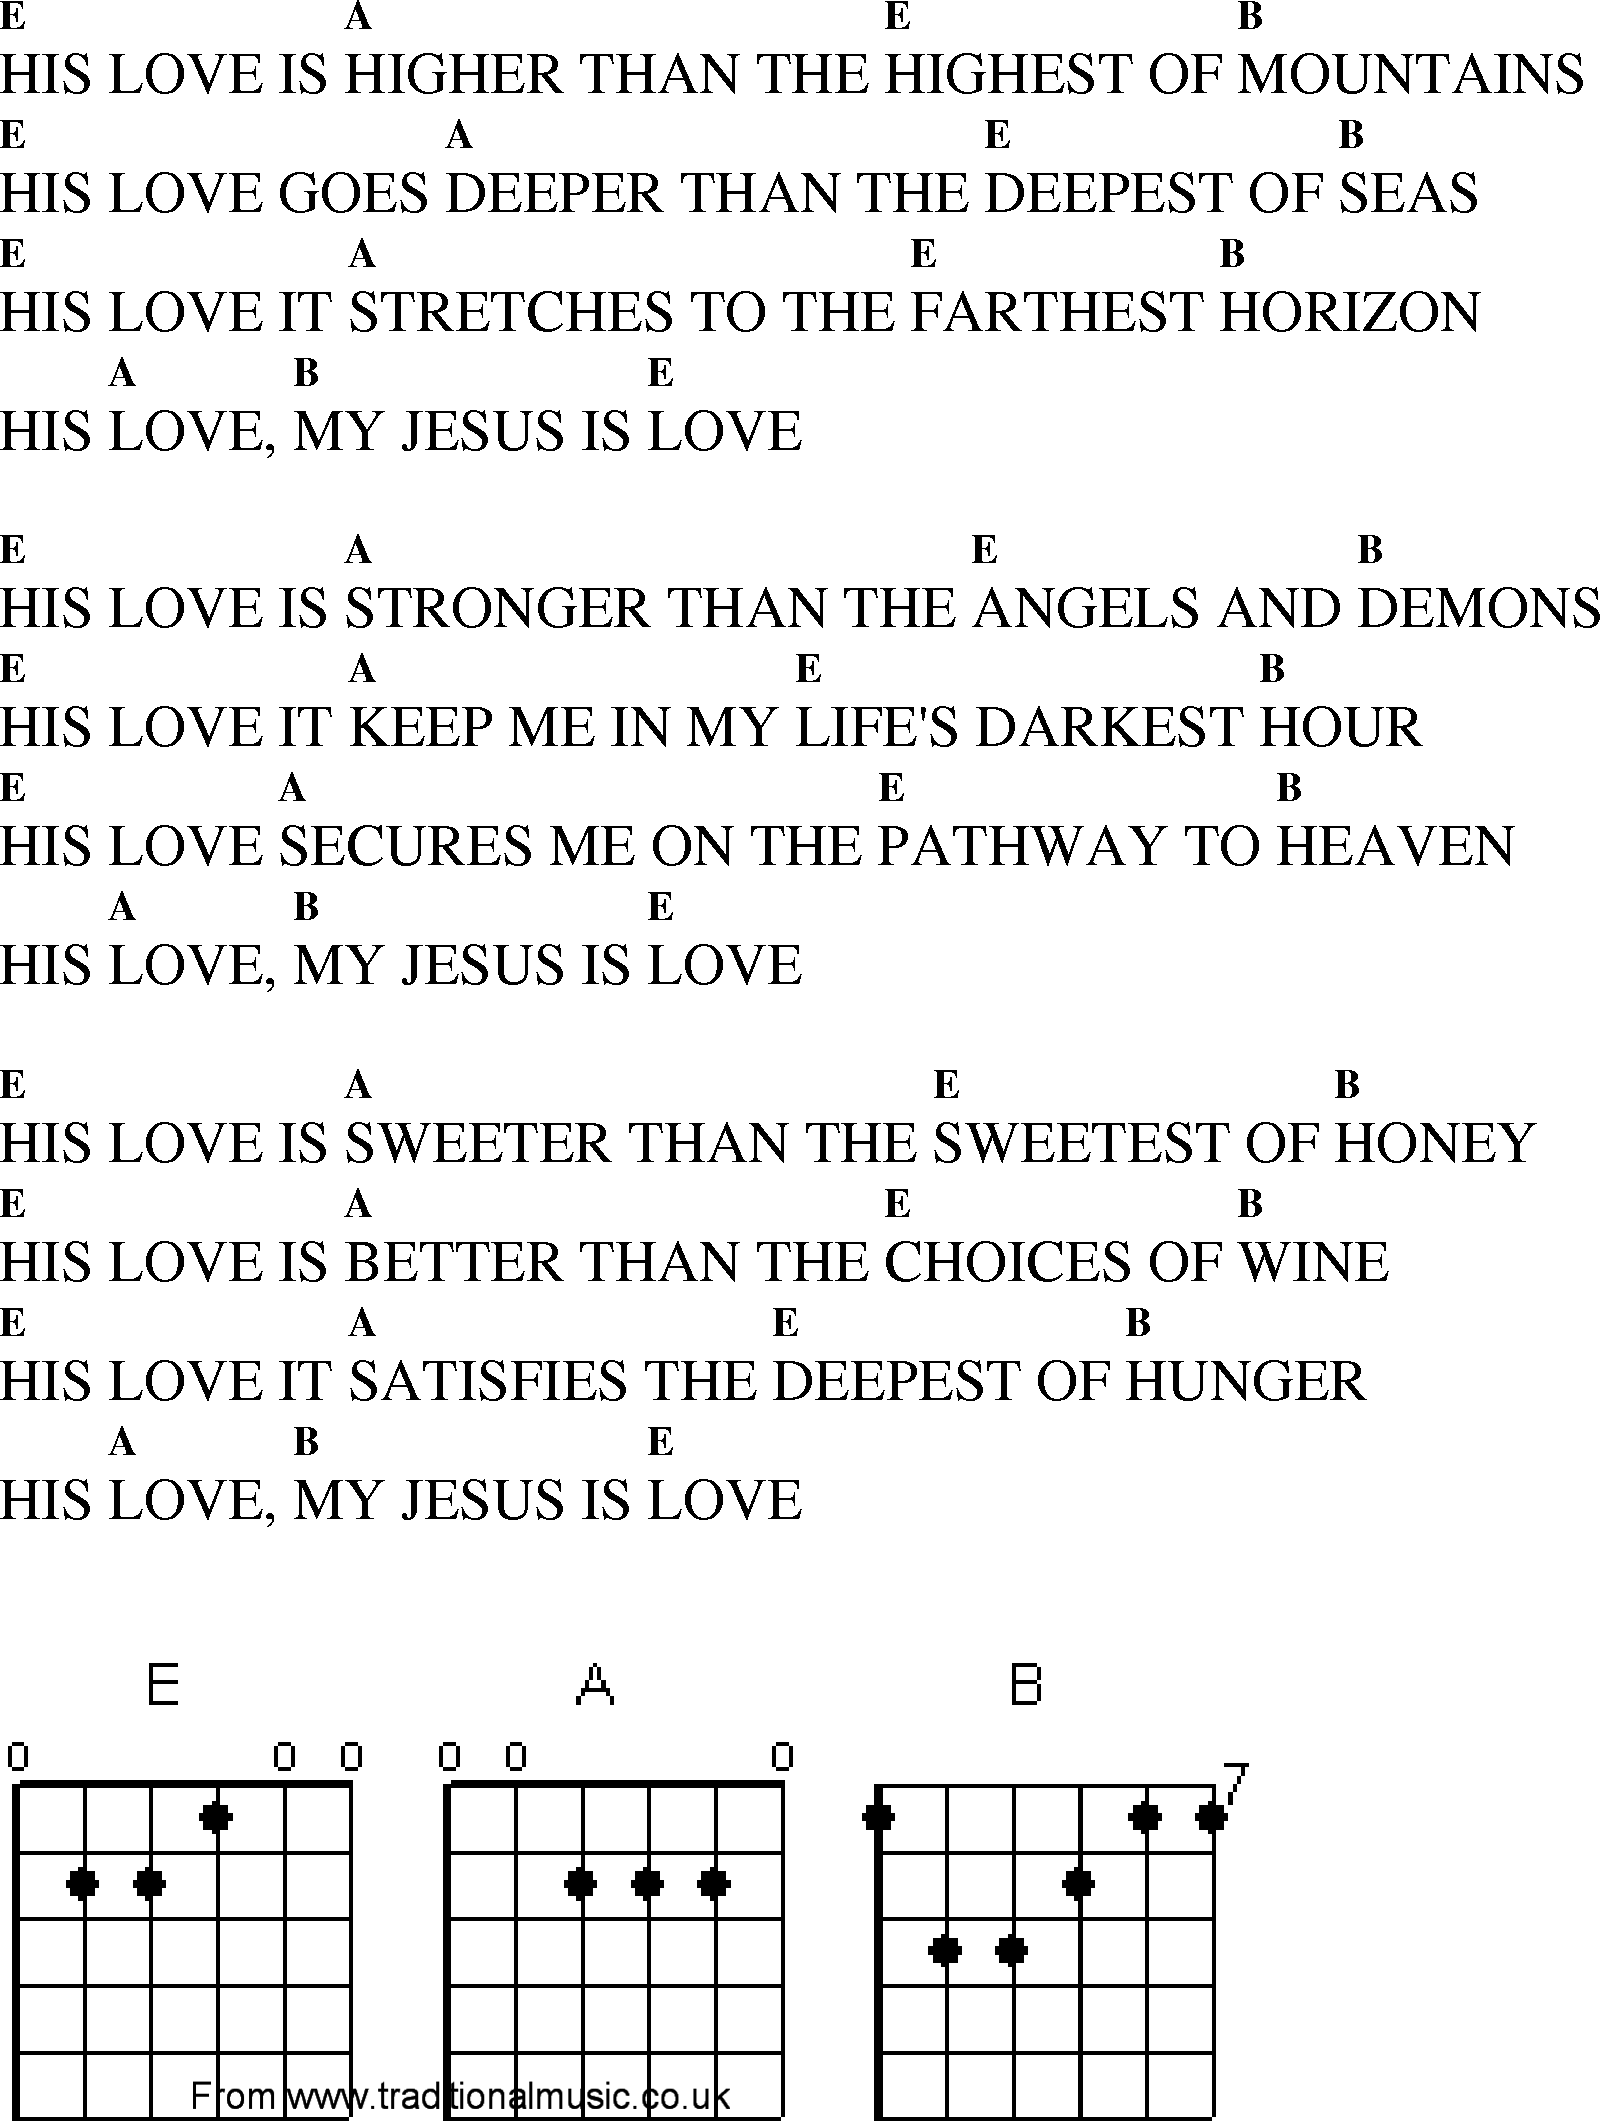 Gospel Song: his_love_is_higher, lyrics and chords.